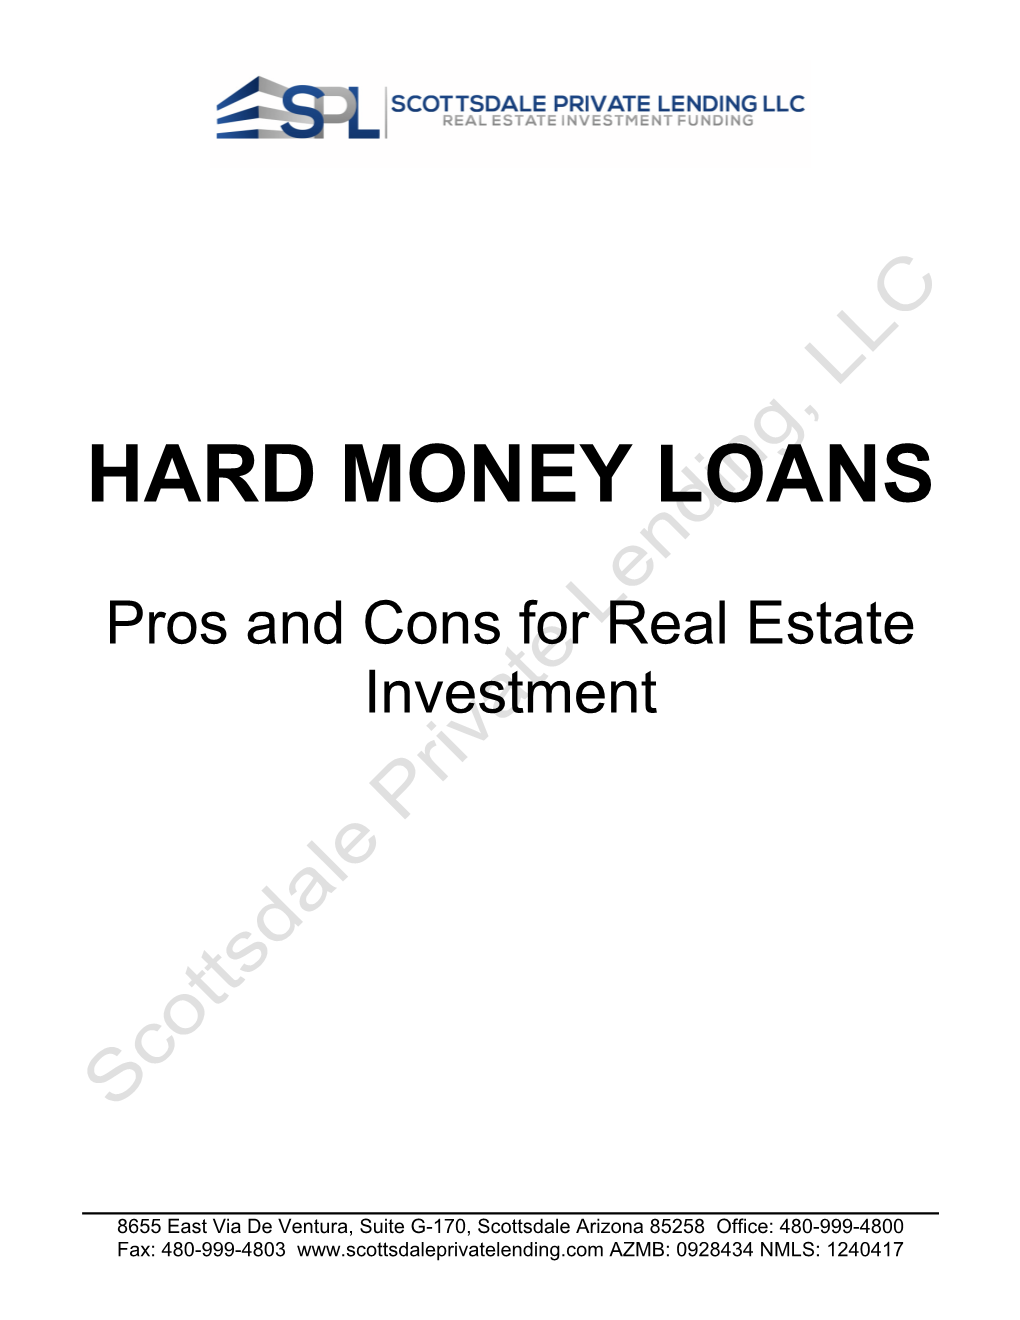 Hard Money Loans for Real Estate Investment